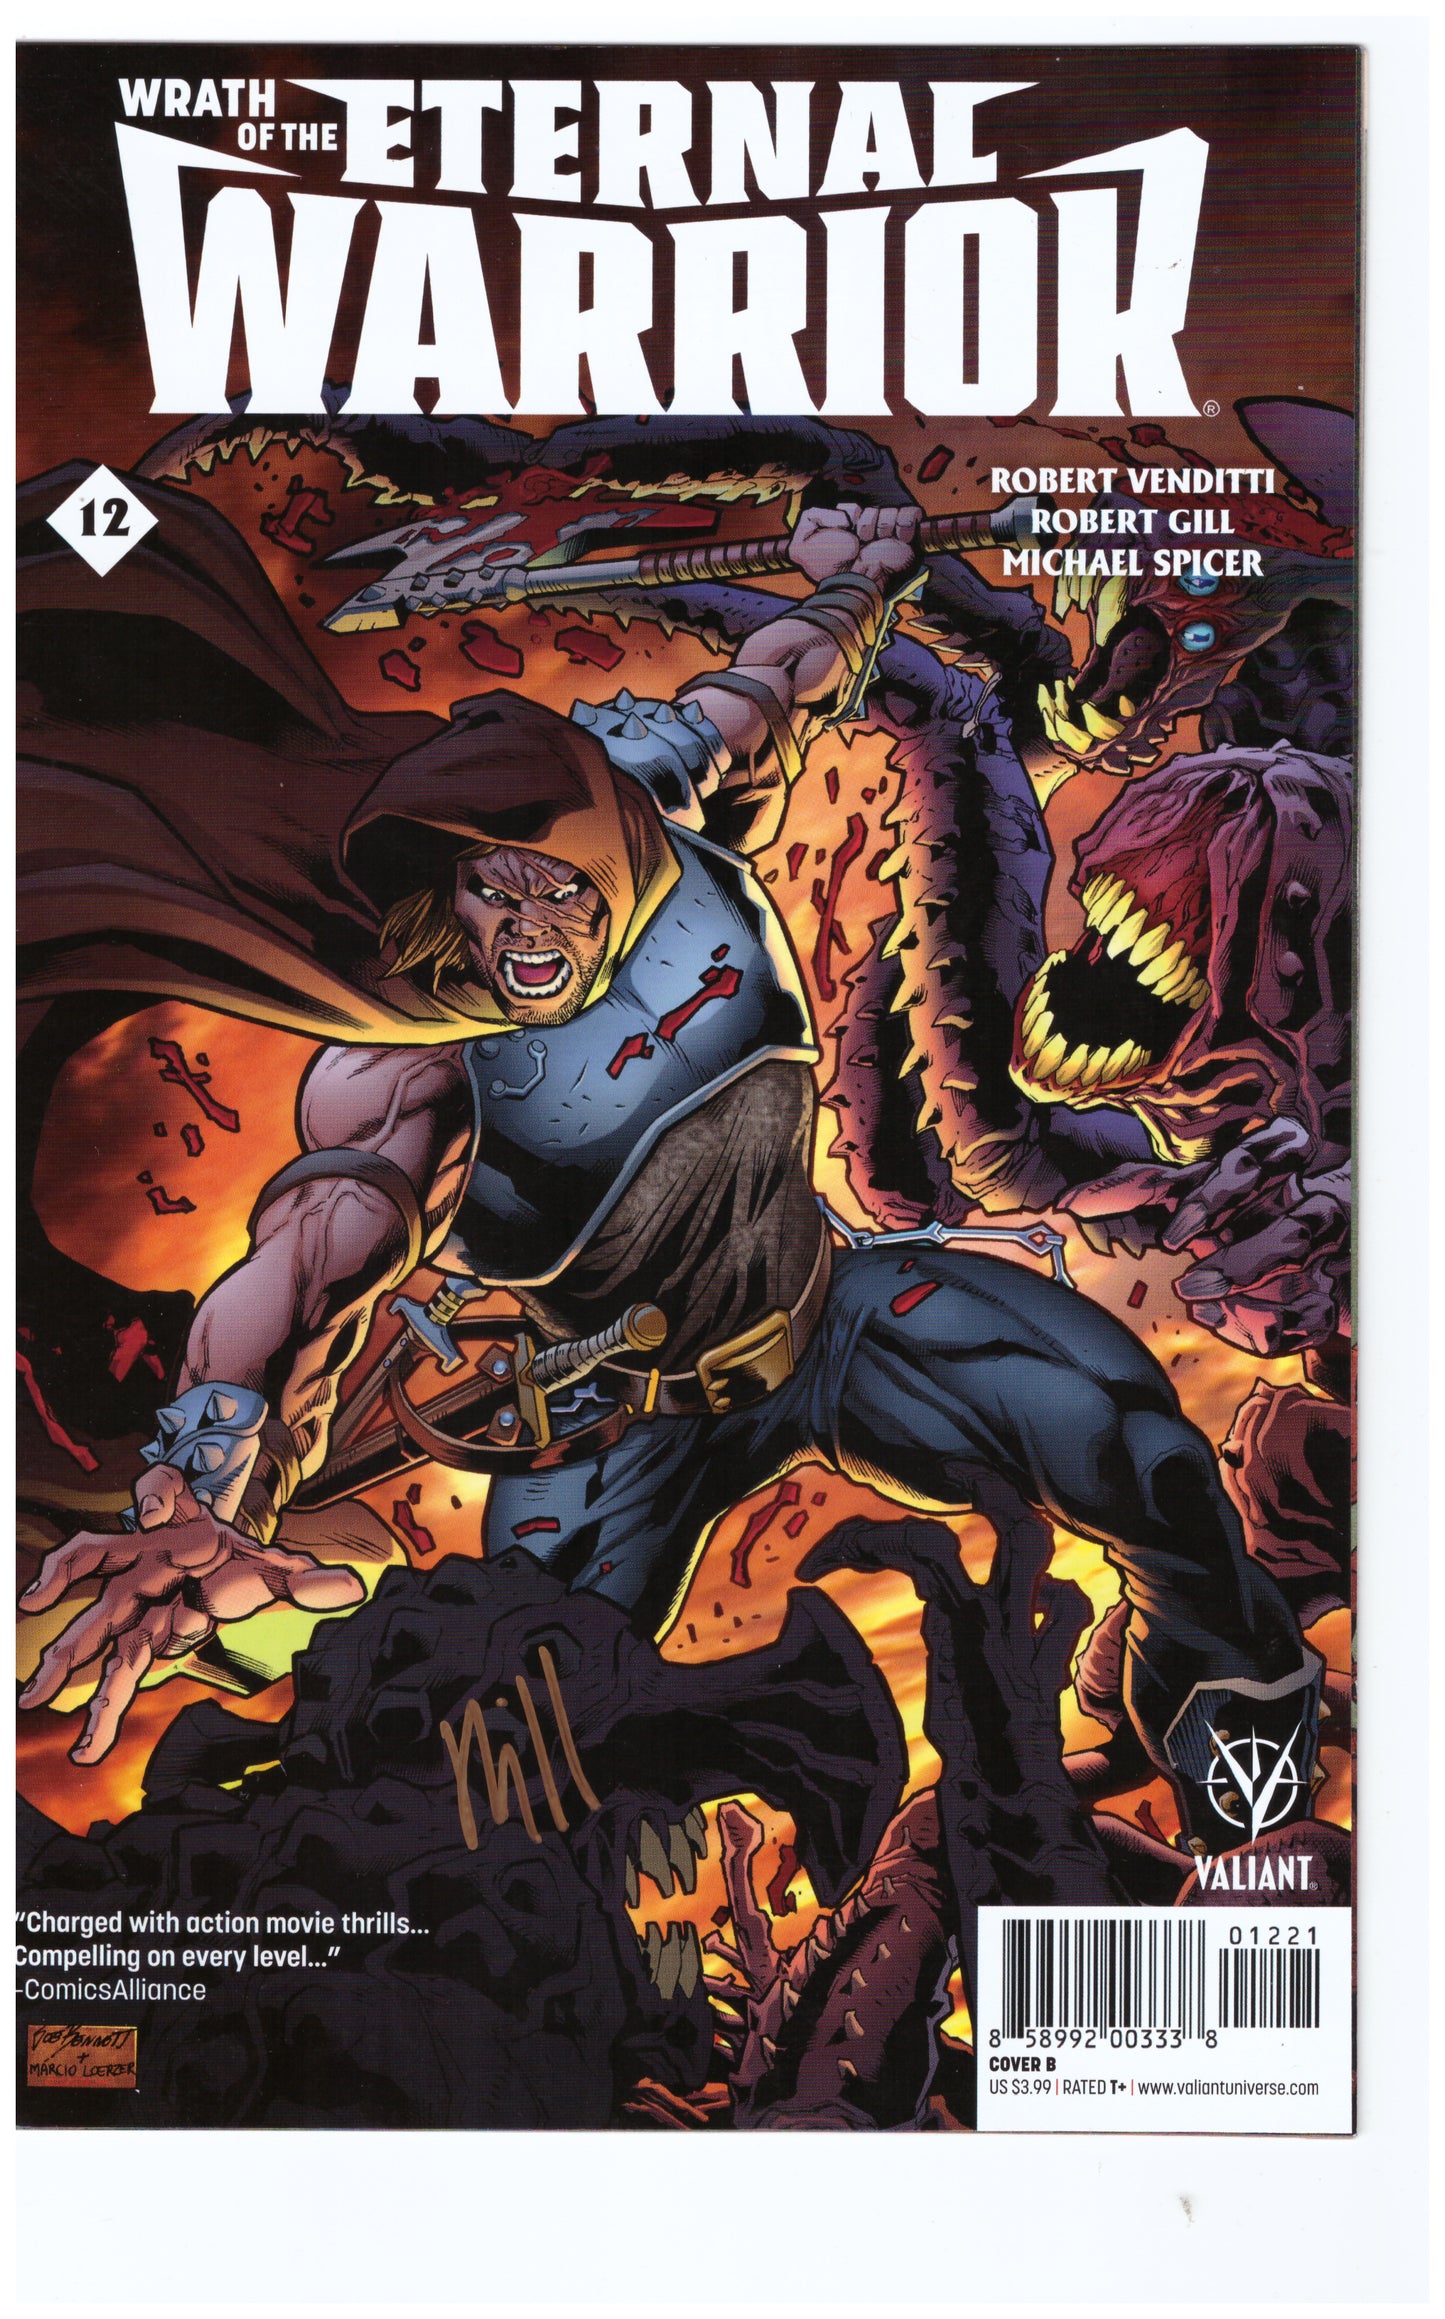 Wrath of the Eternal Warrior #12 Signed